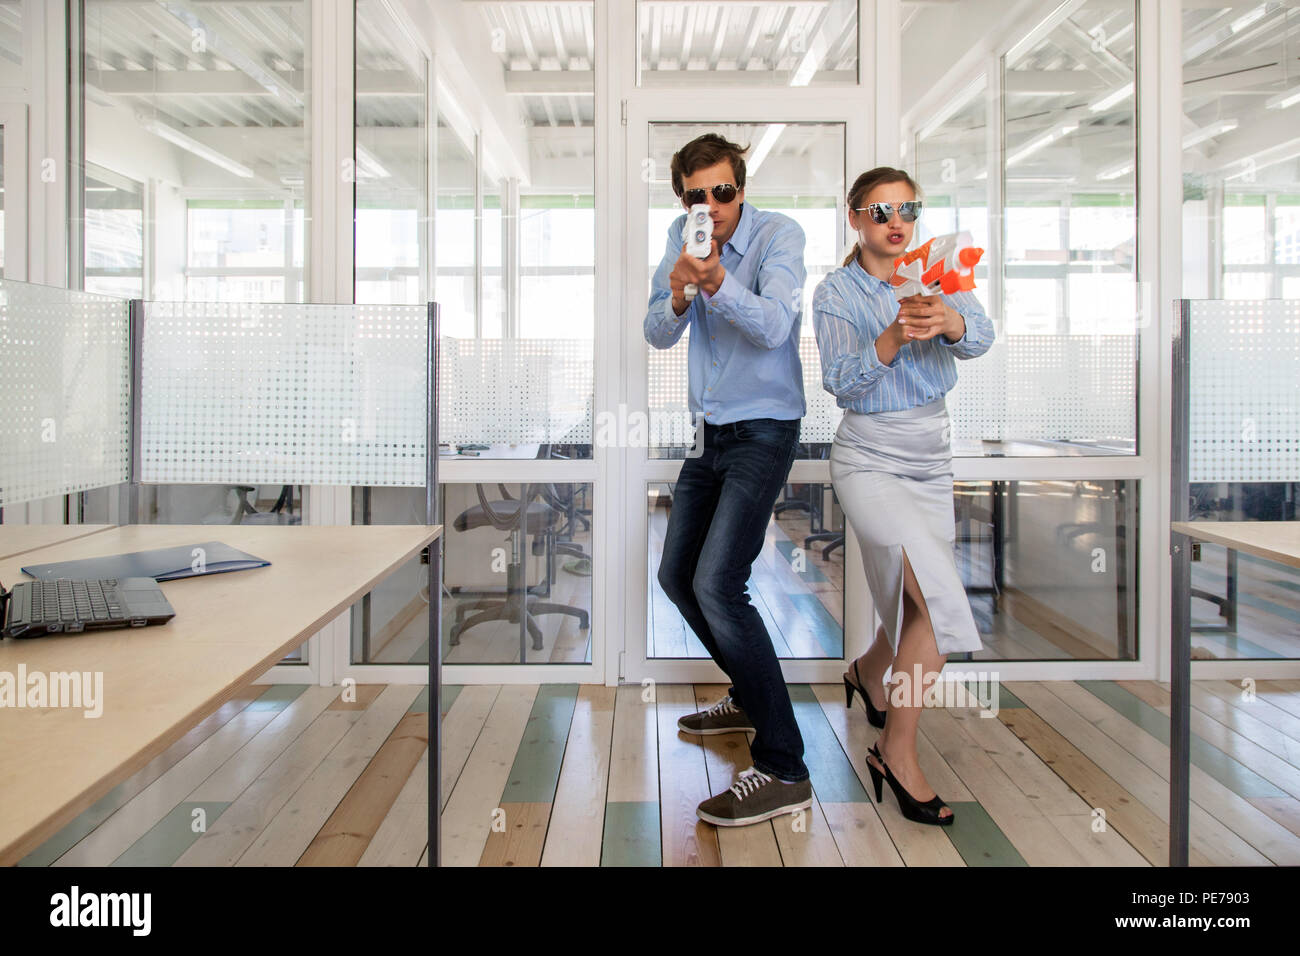 Colleagues with toy guns in office Stock Photo